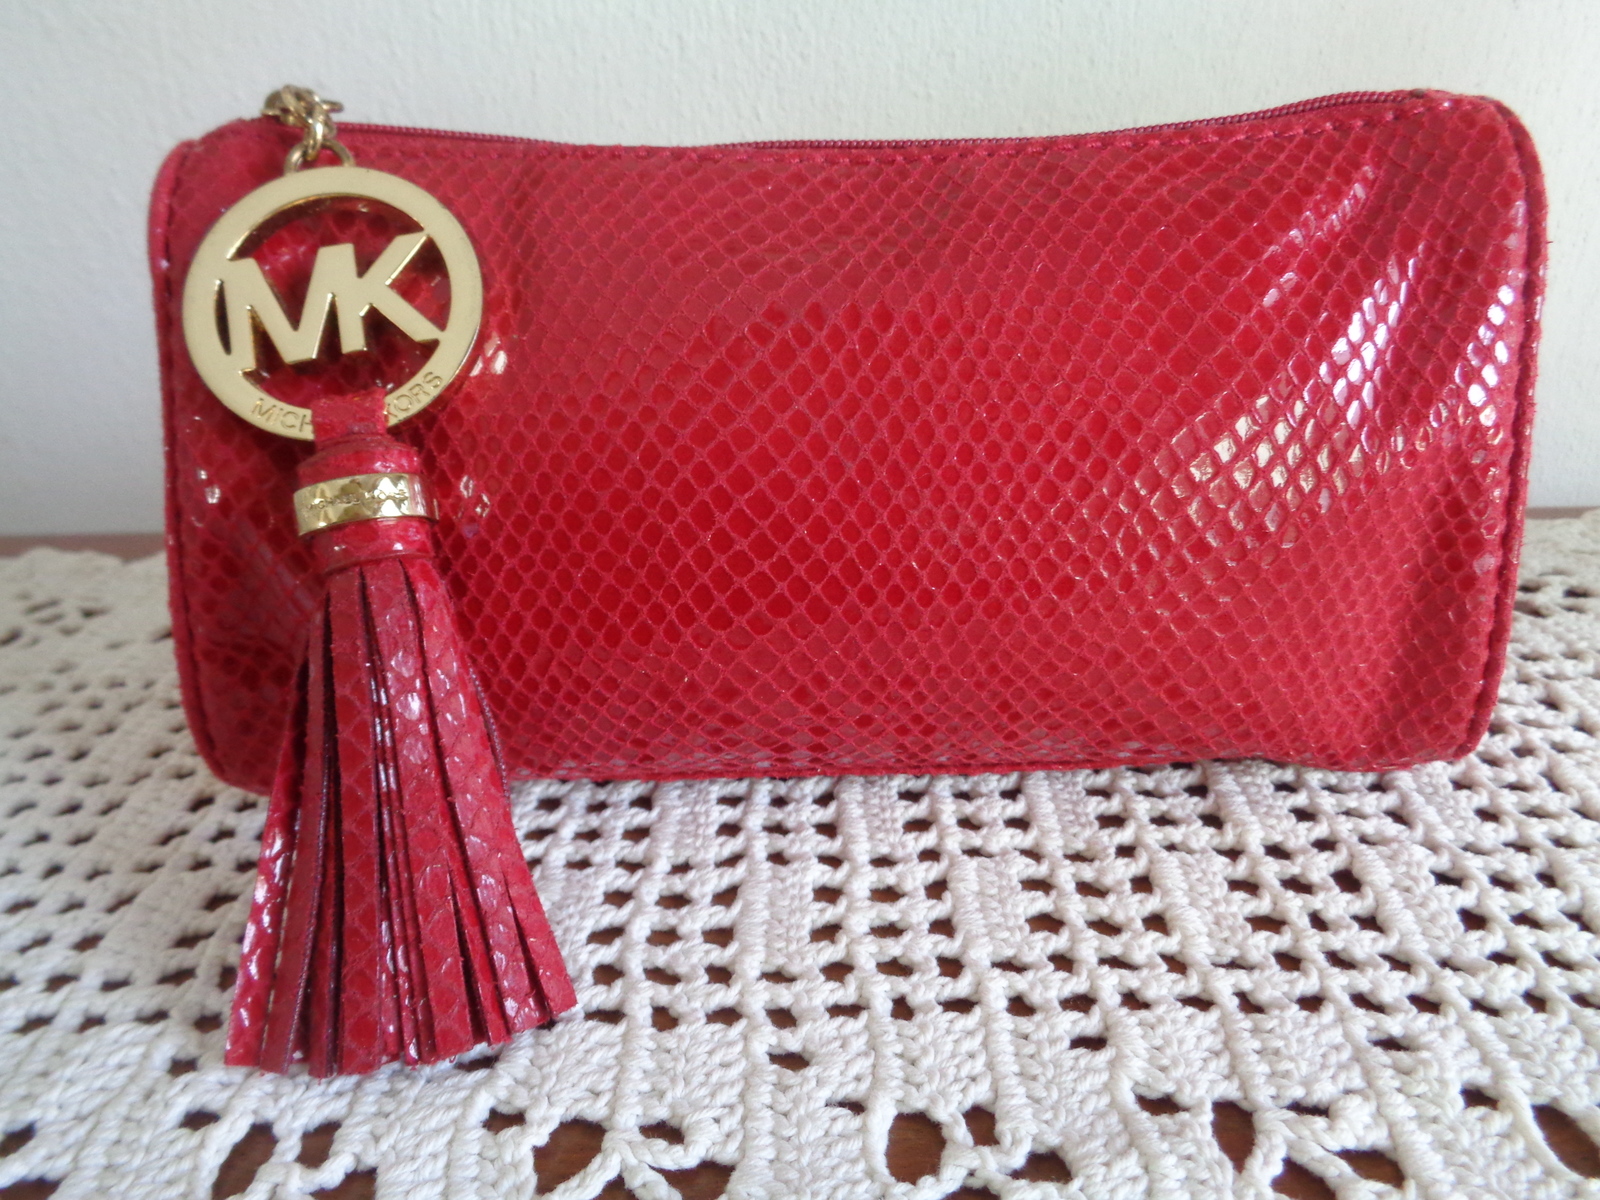 Michael Kors Clutch Evening Bag Cosmetic Case Make Up Pouch Red Snakeskin Look - $45.95